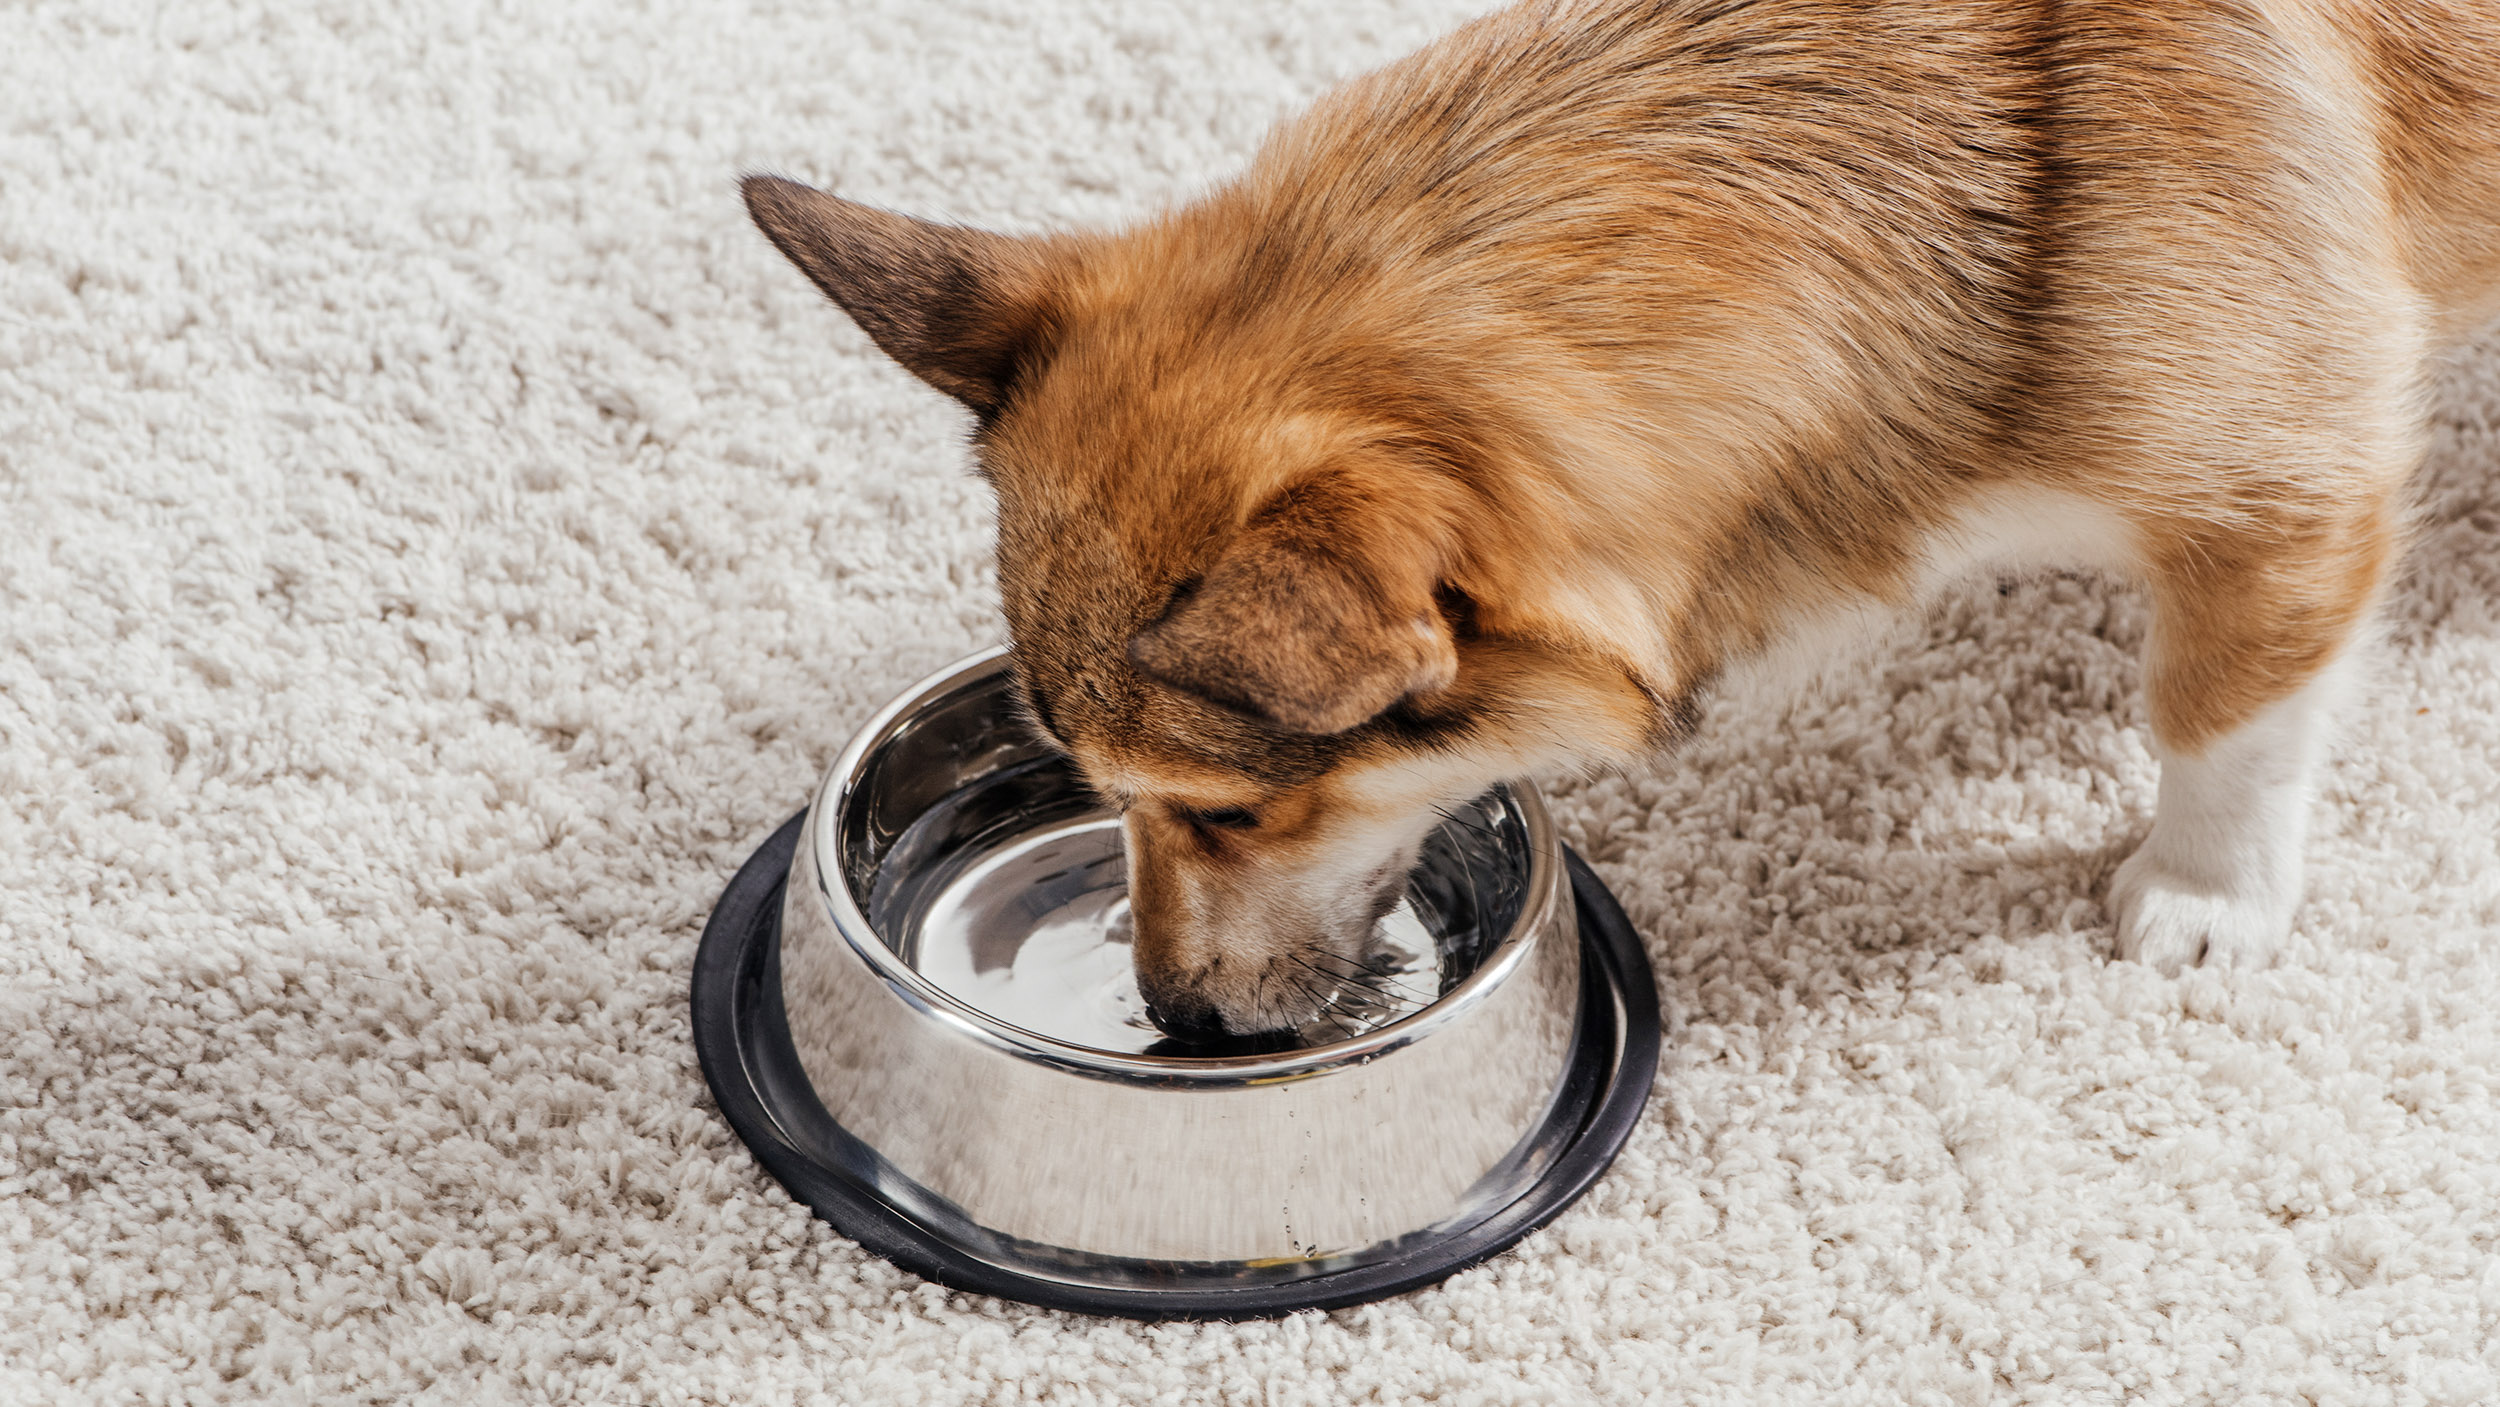 Welsh Corgi standing on a cream carpet eating from a silver bowl.